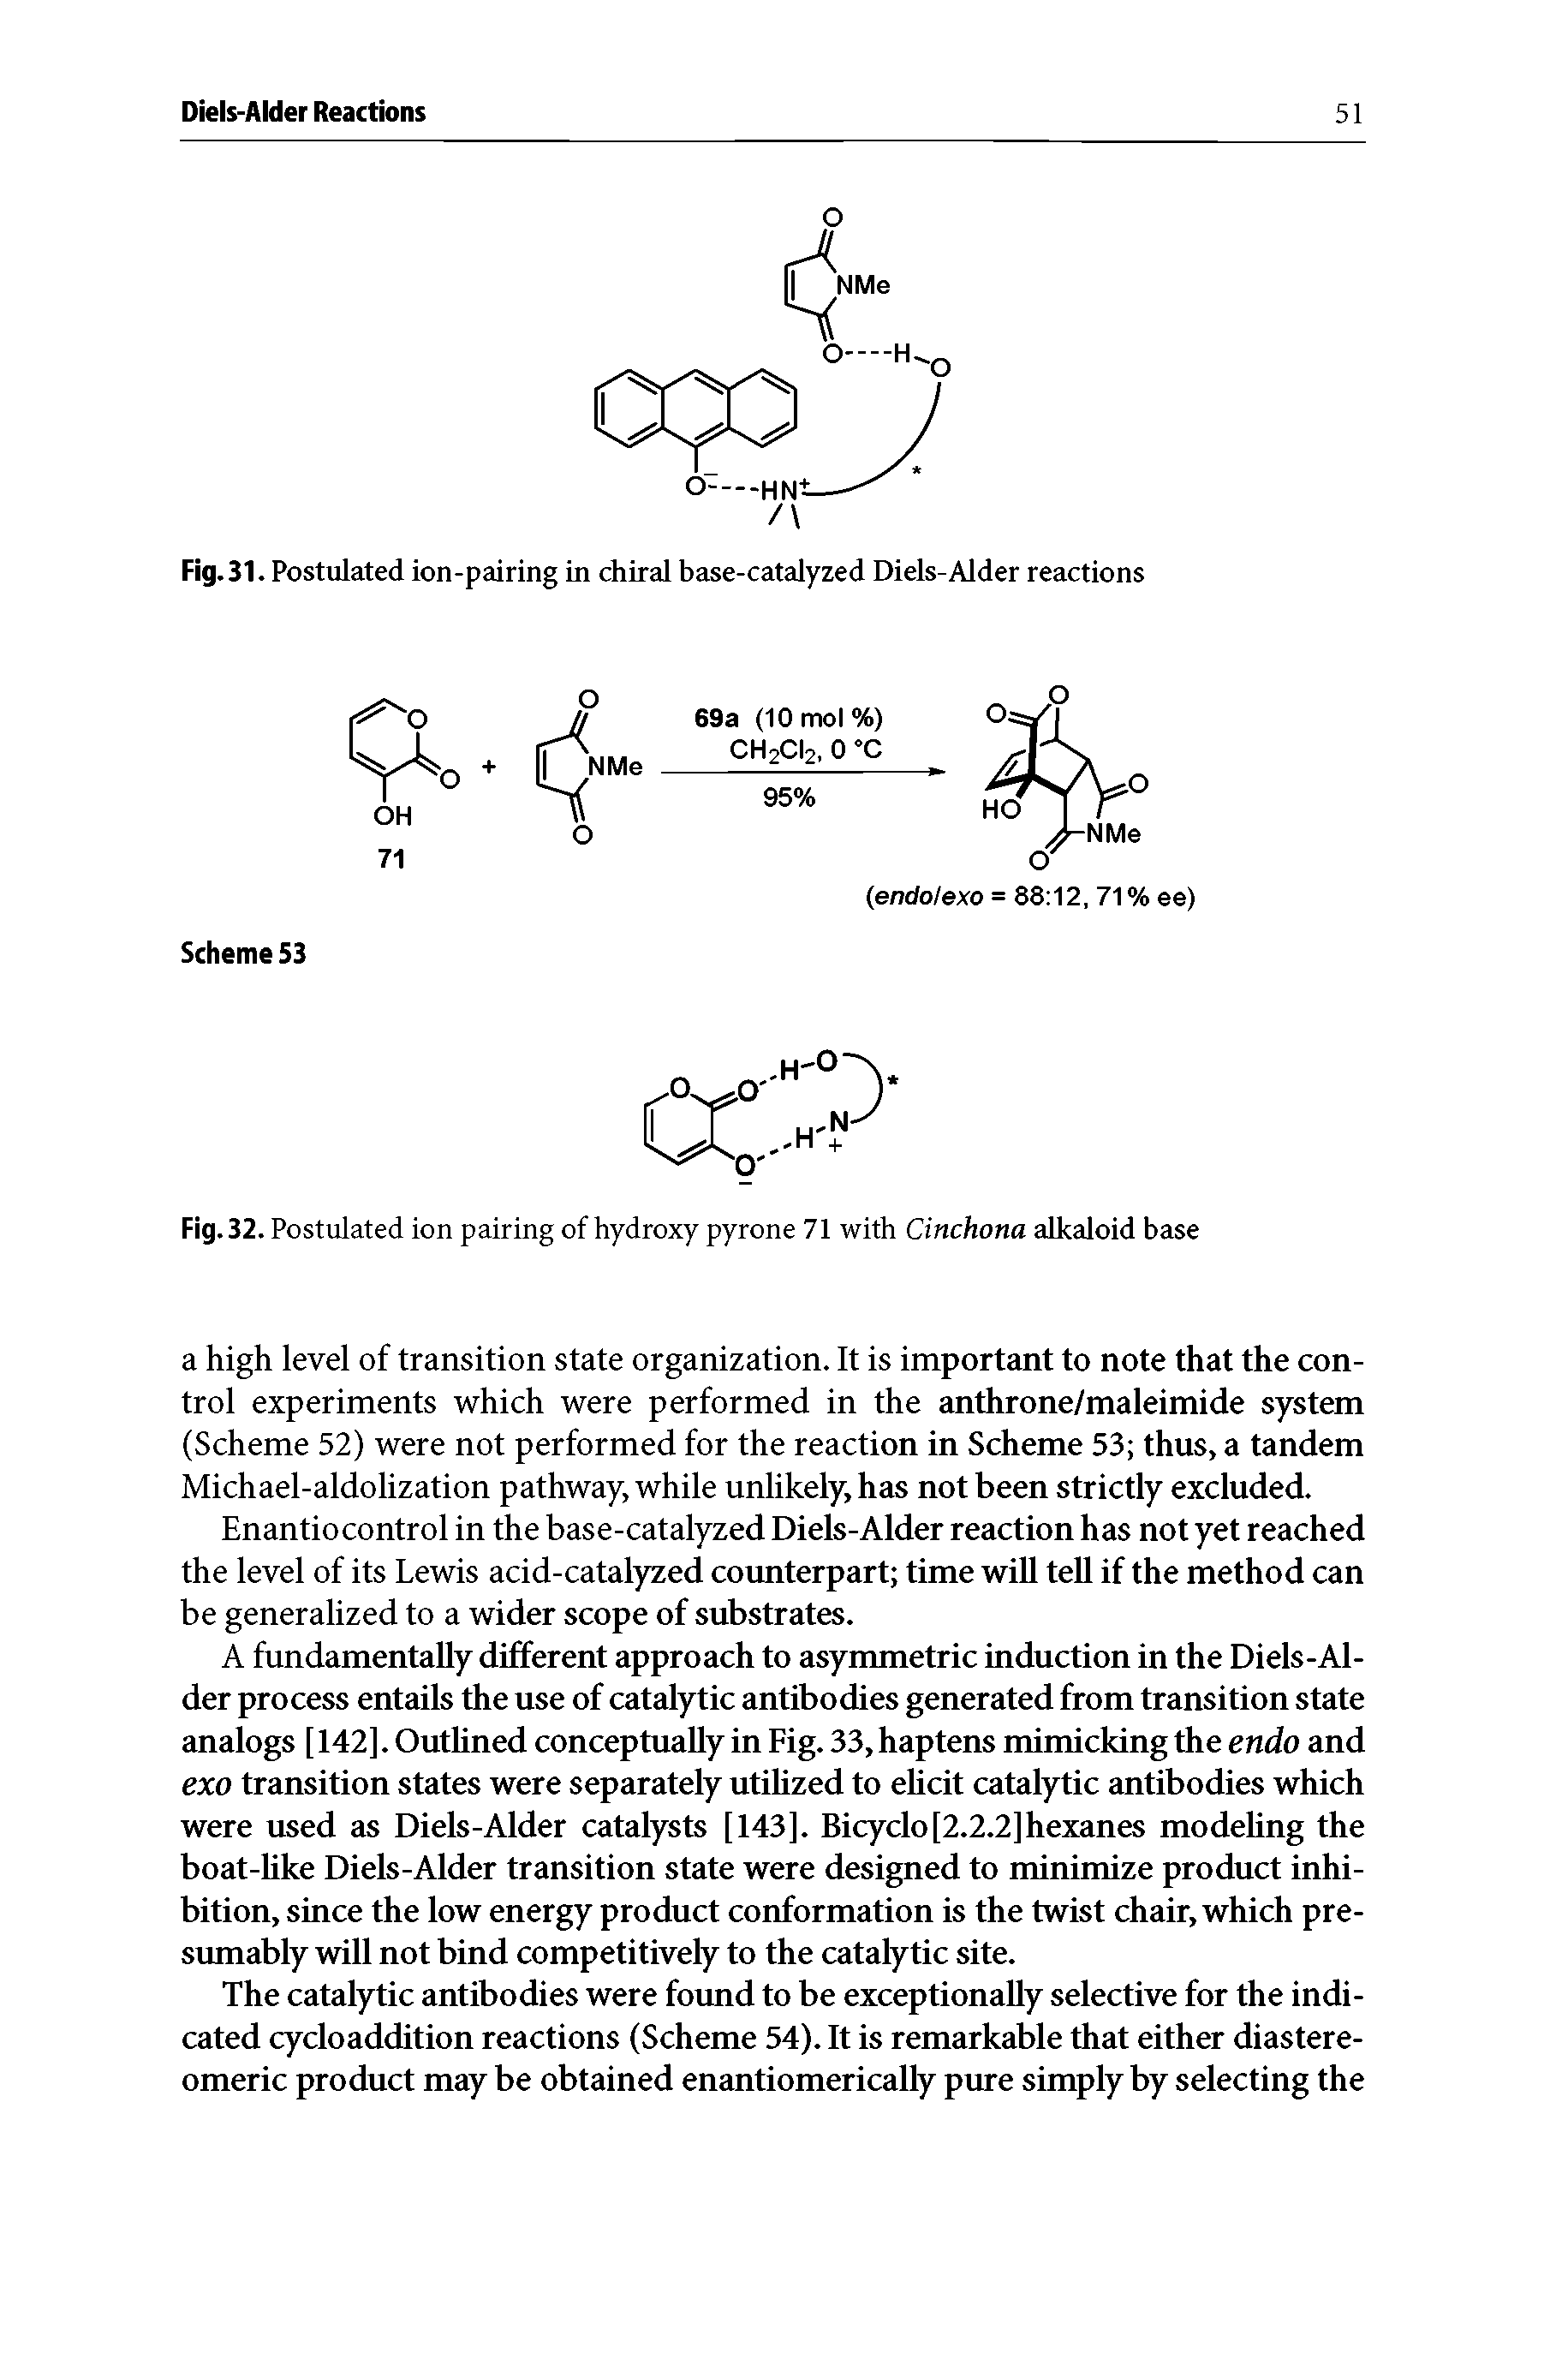 Fig. 32. Postulated ion pairing of hydroxy pyrone 71 with Cinchona alkaloid base...